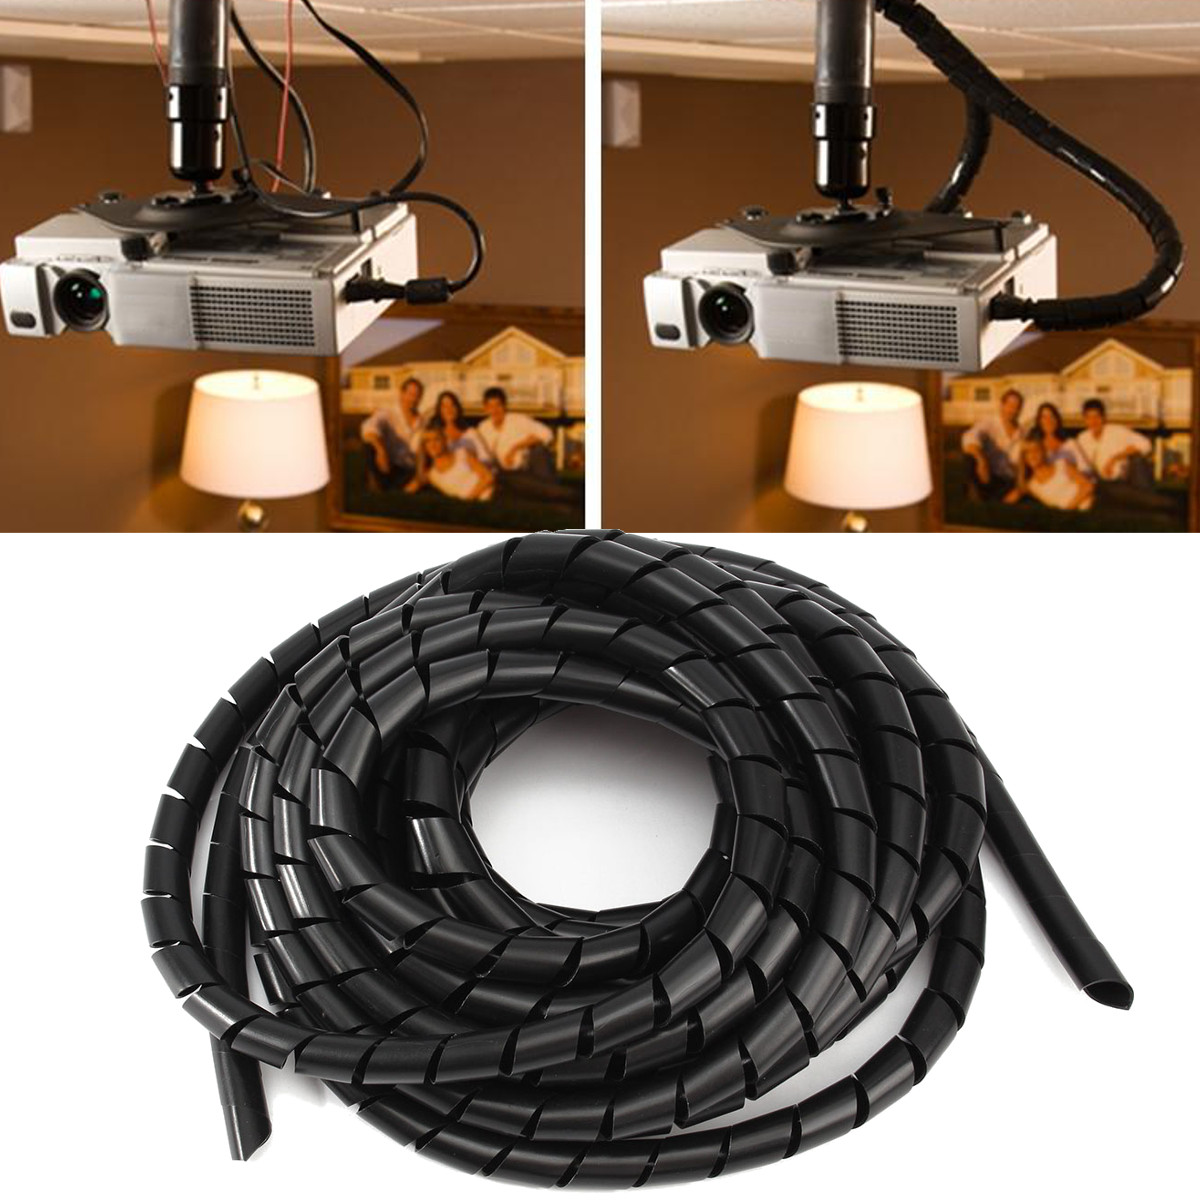 Black-Spiral-Polyethylene-Cable-Electrical-Wire-Wrap-Tube-Computer-Manage-Cord-1089427-1